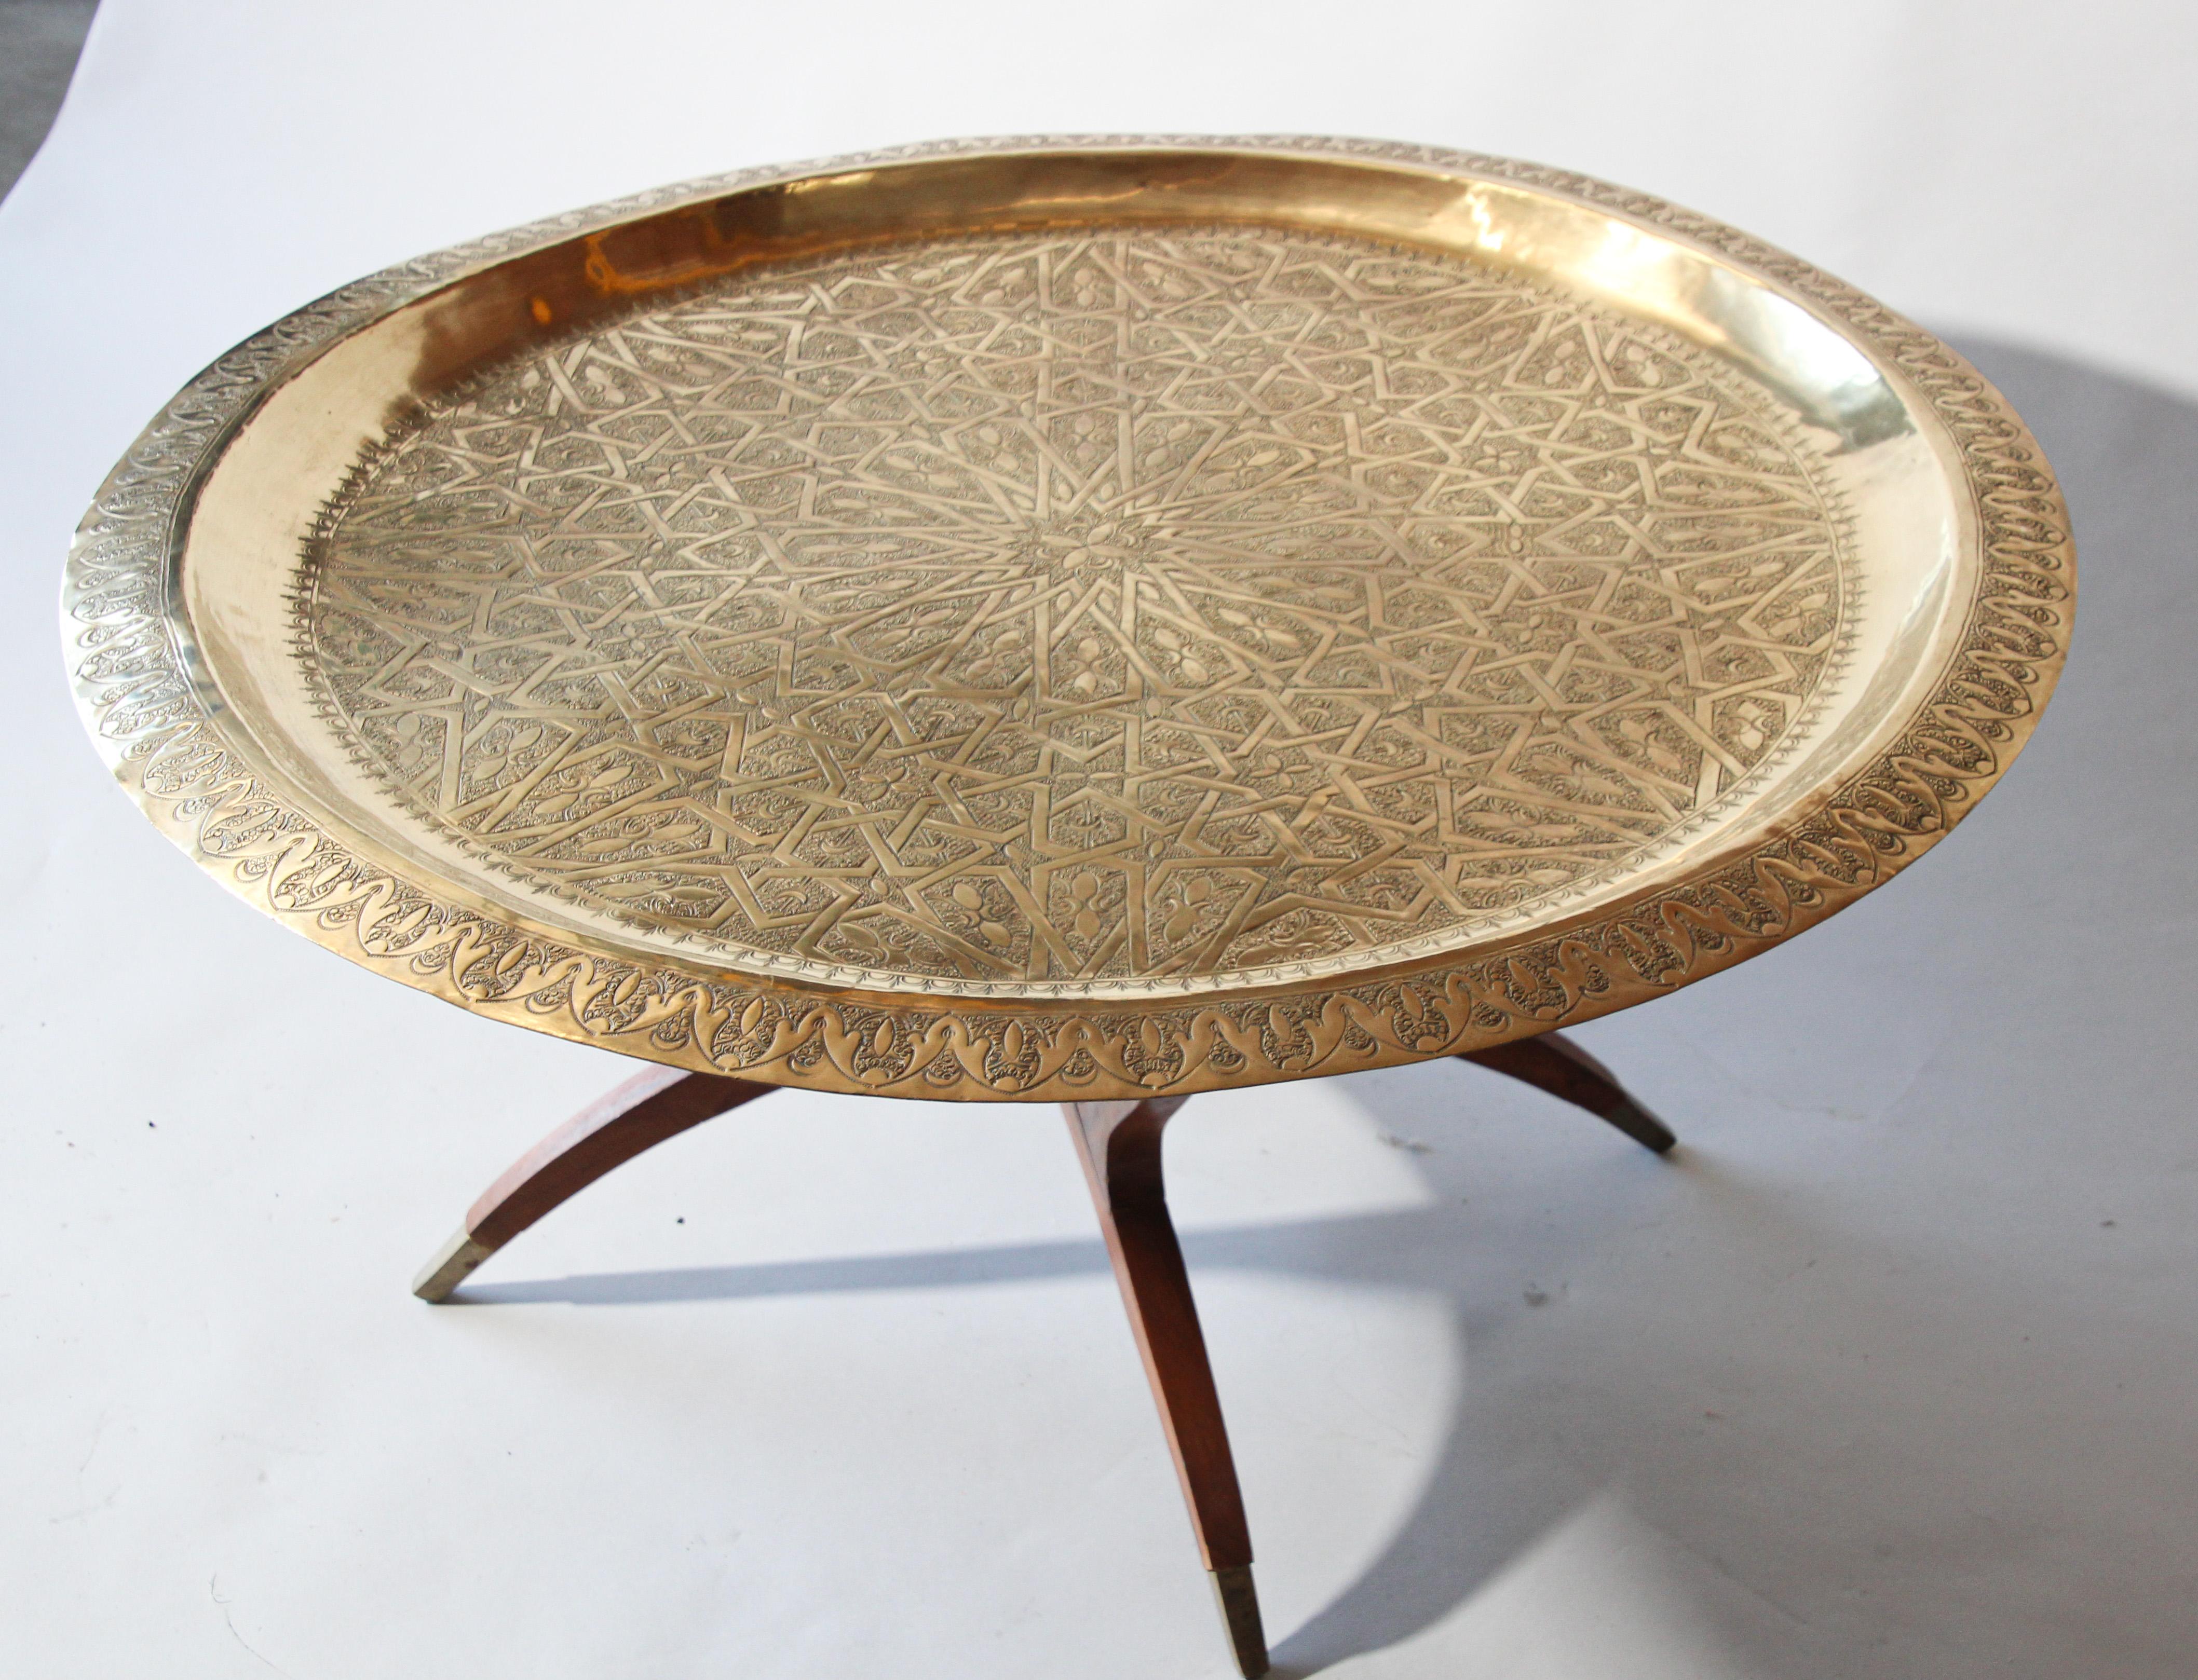 Engraved and embossed large 39 inches round midcentury Anglo-Indian brass tray table.
Polished brass Moroccan tray, very good condition, standing on folding mahogany base with six legs.
Large metal hand-hammered brass tray coffee table.
Middle